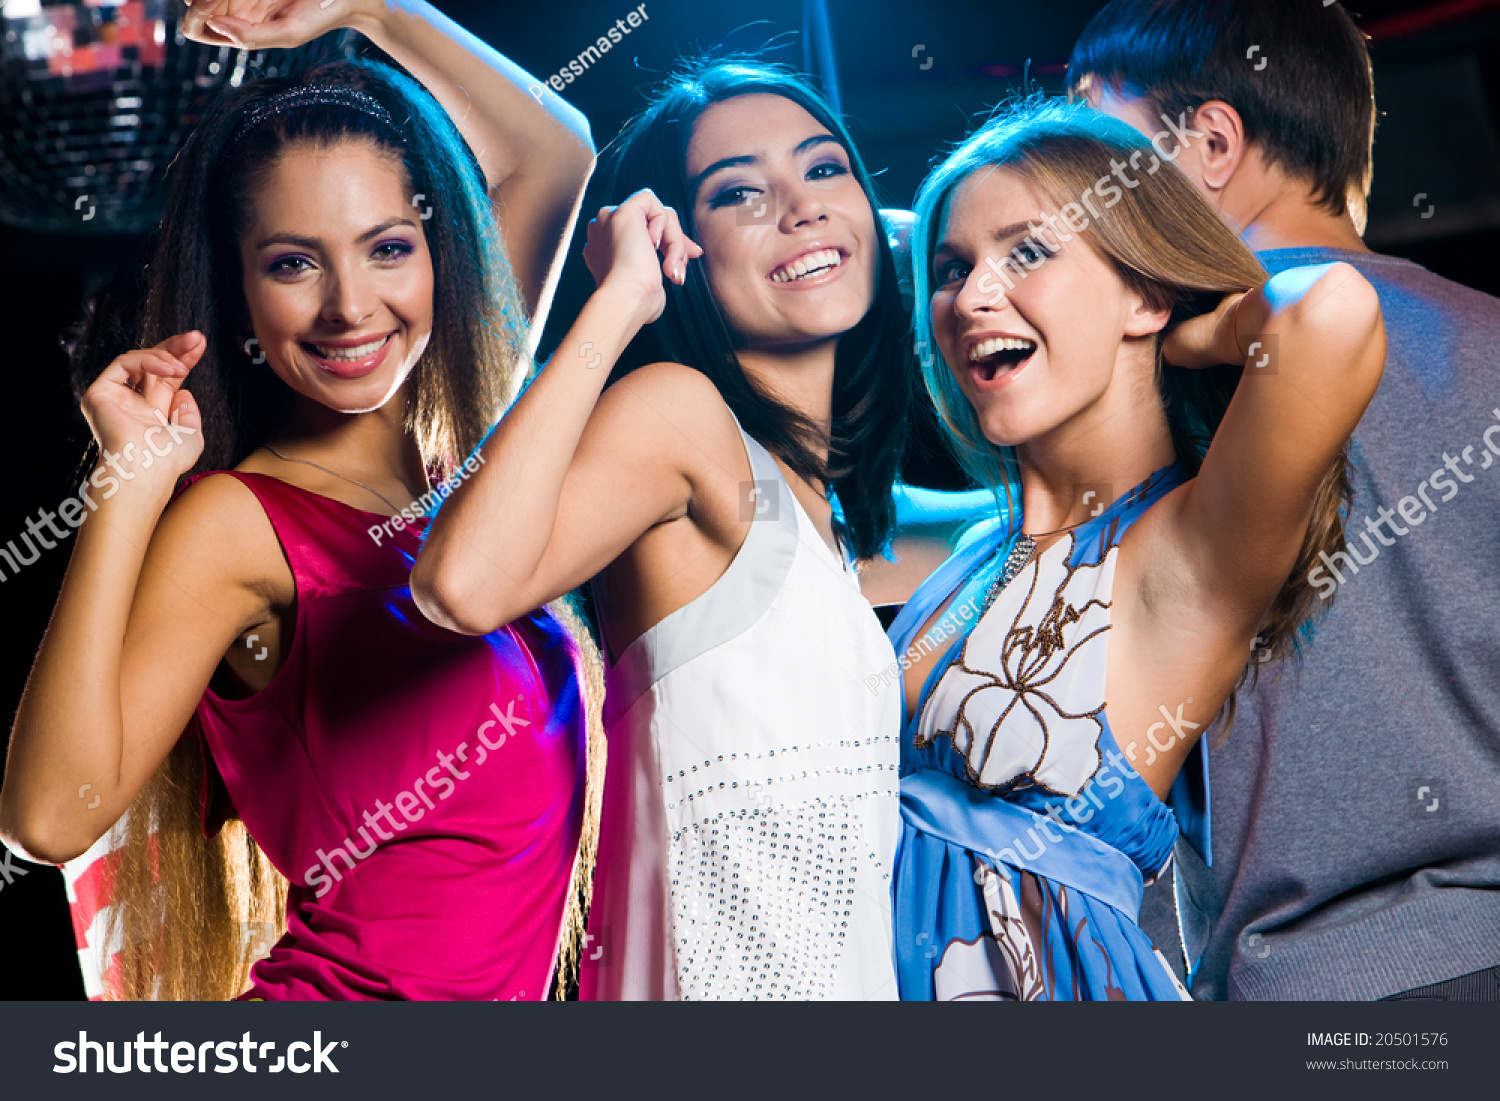 Three Laughing Girls Dancing Together Clib Stock Photo 20501576 ...